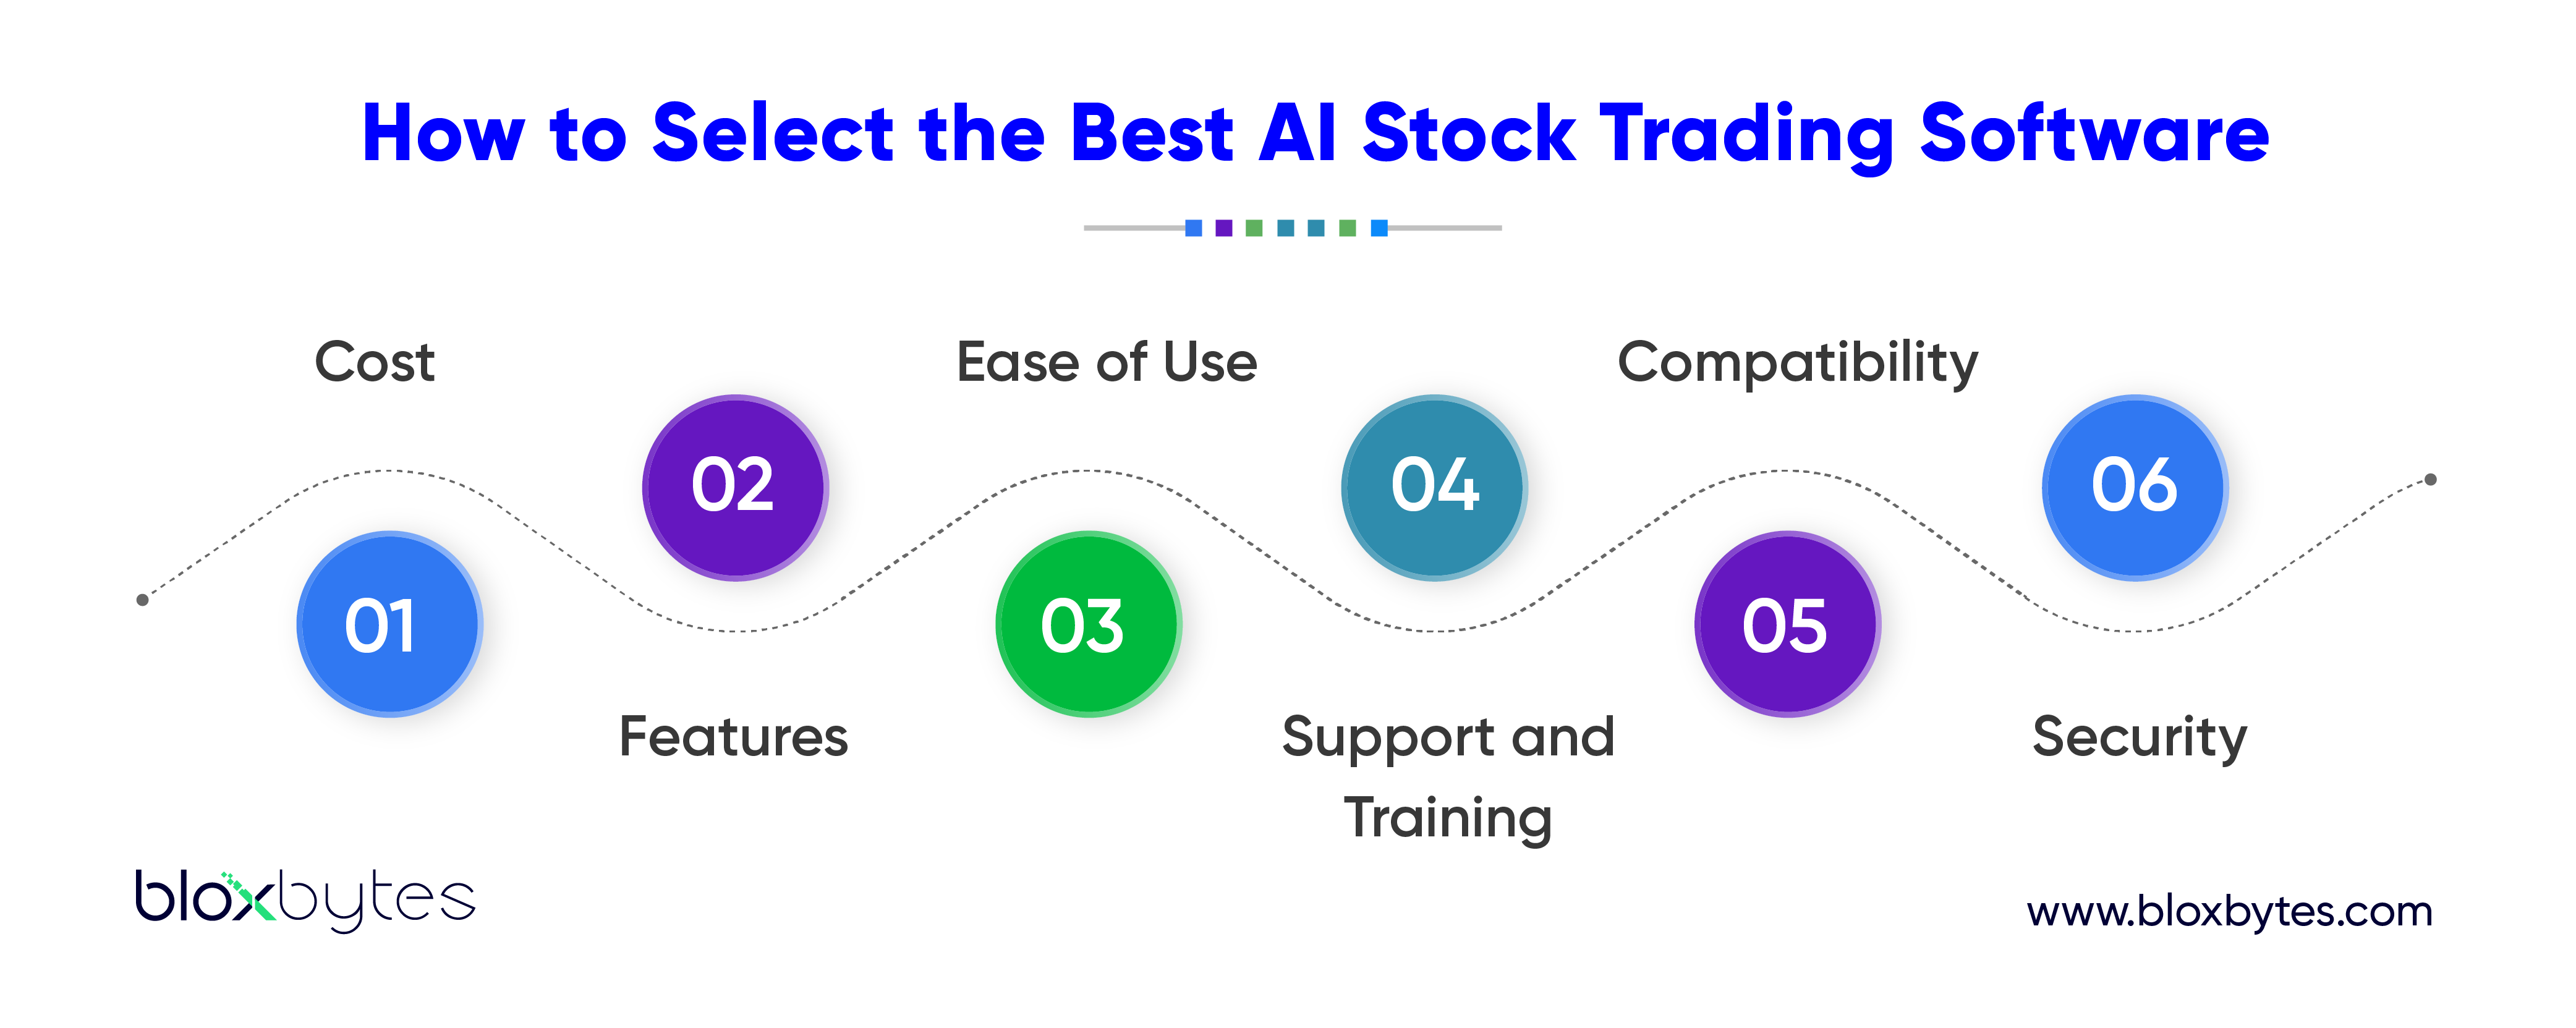 Best AI Stock Trading Software